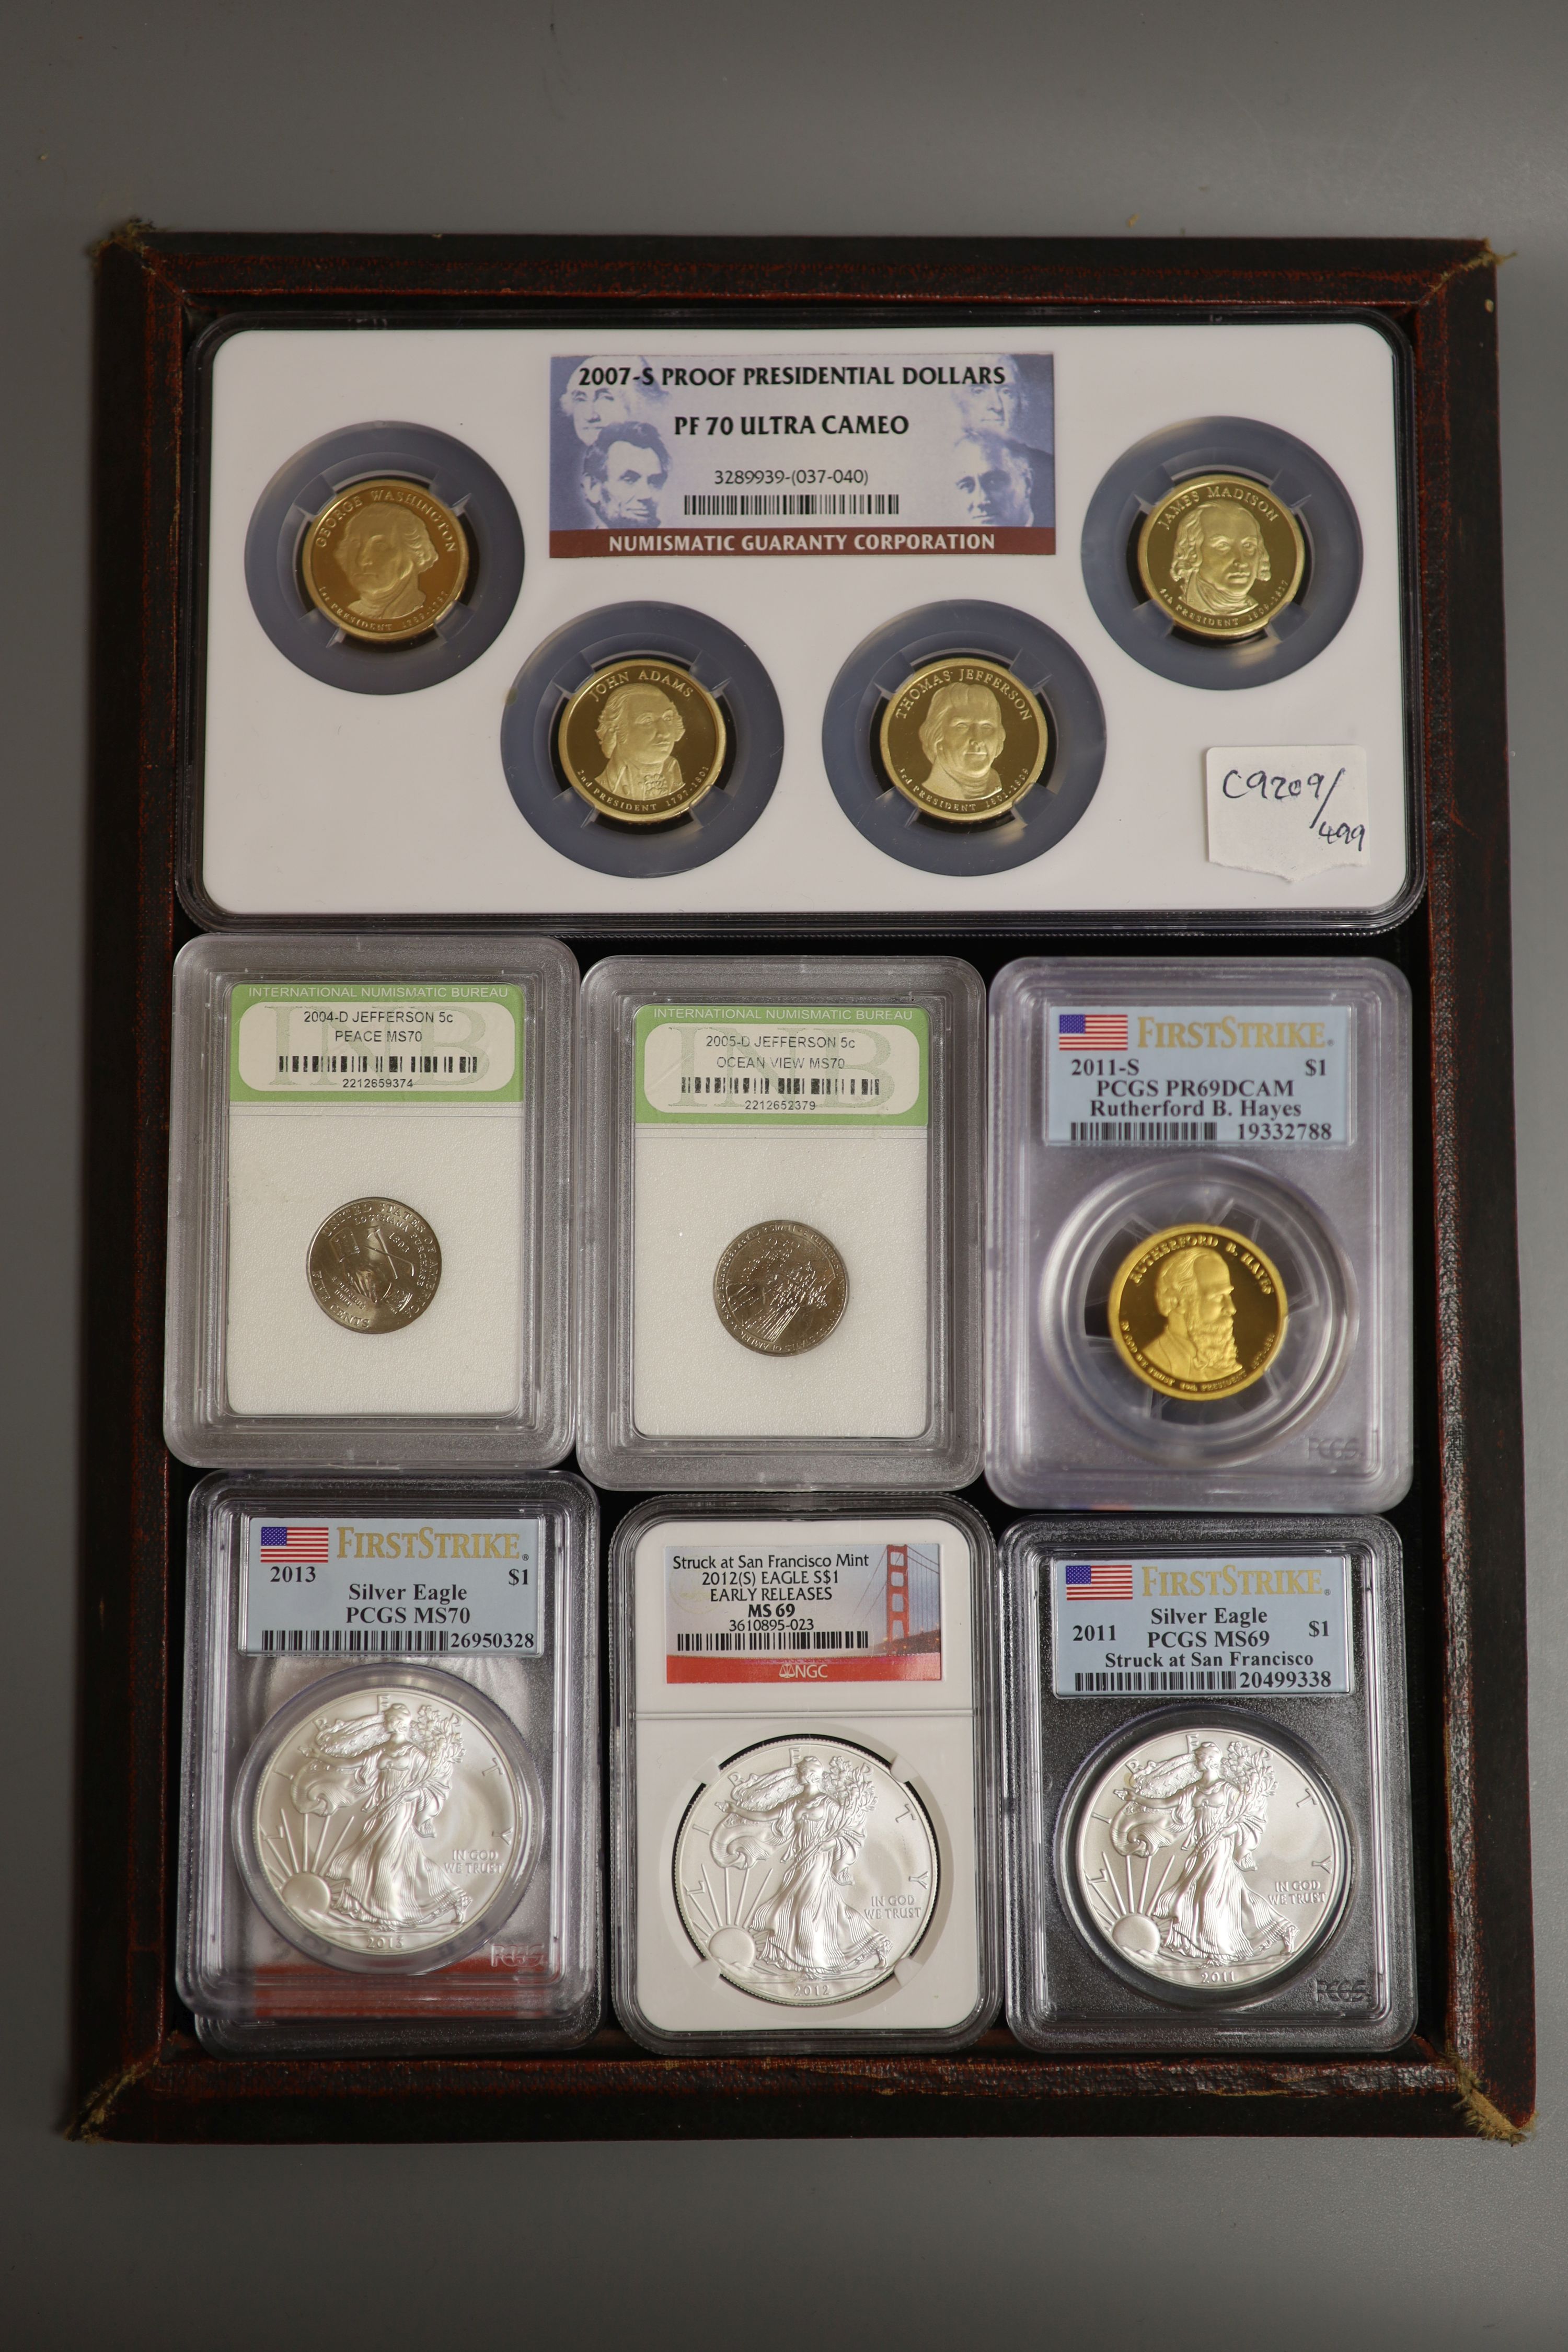 A group of US proof or uncirculated coins in capsules -, Four Silver Eagle $1, 2011 2013 2012 x 2, four 2007S Proof presidential dollars, four 5 cents 2004-6, four 2011s presidential dollars